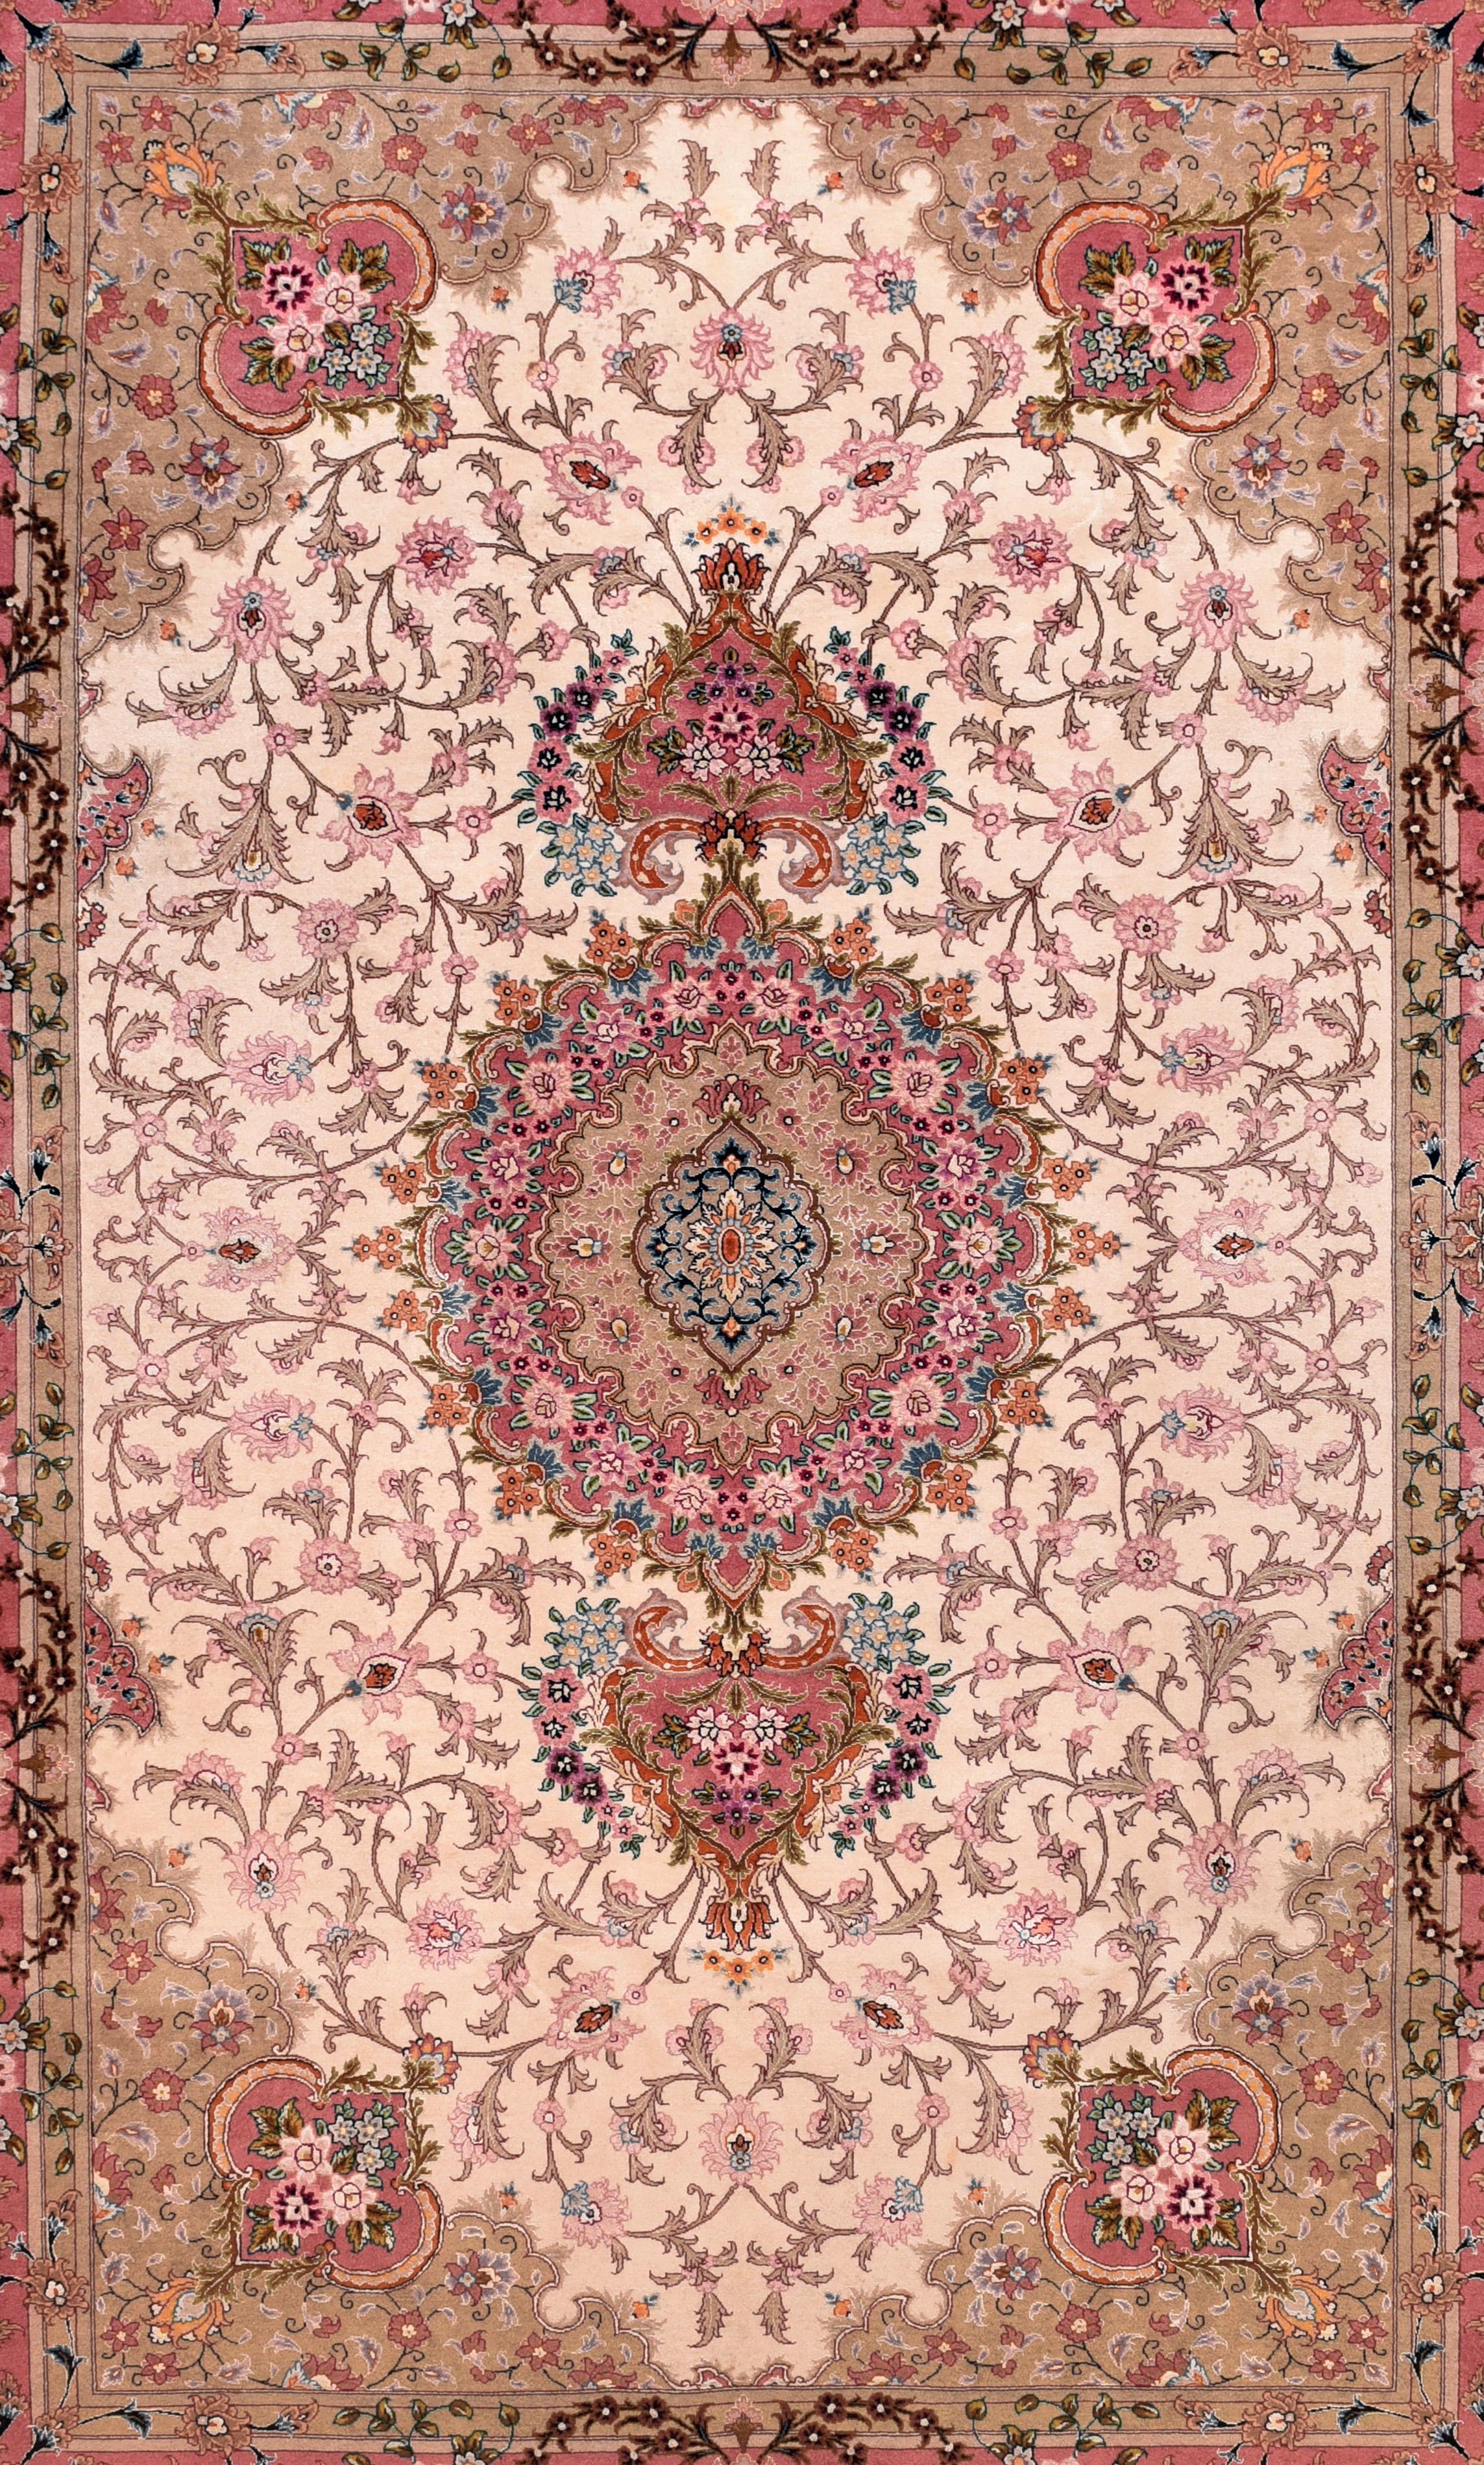 A Tabriz rug/carpet is a type in the general category of Persian carpets. from the city of Tabriz, the capital city of East Azarbaijan Province in north west of Iran totally populated by Azerbaijanis. It is one of the oldest rug weaving centers and